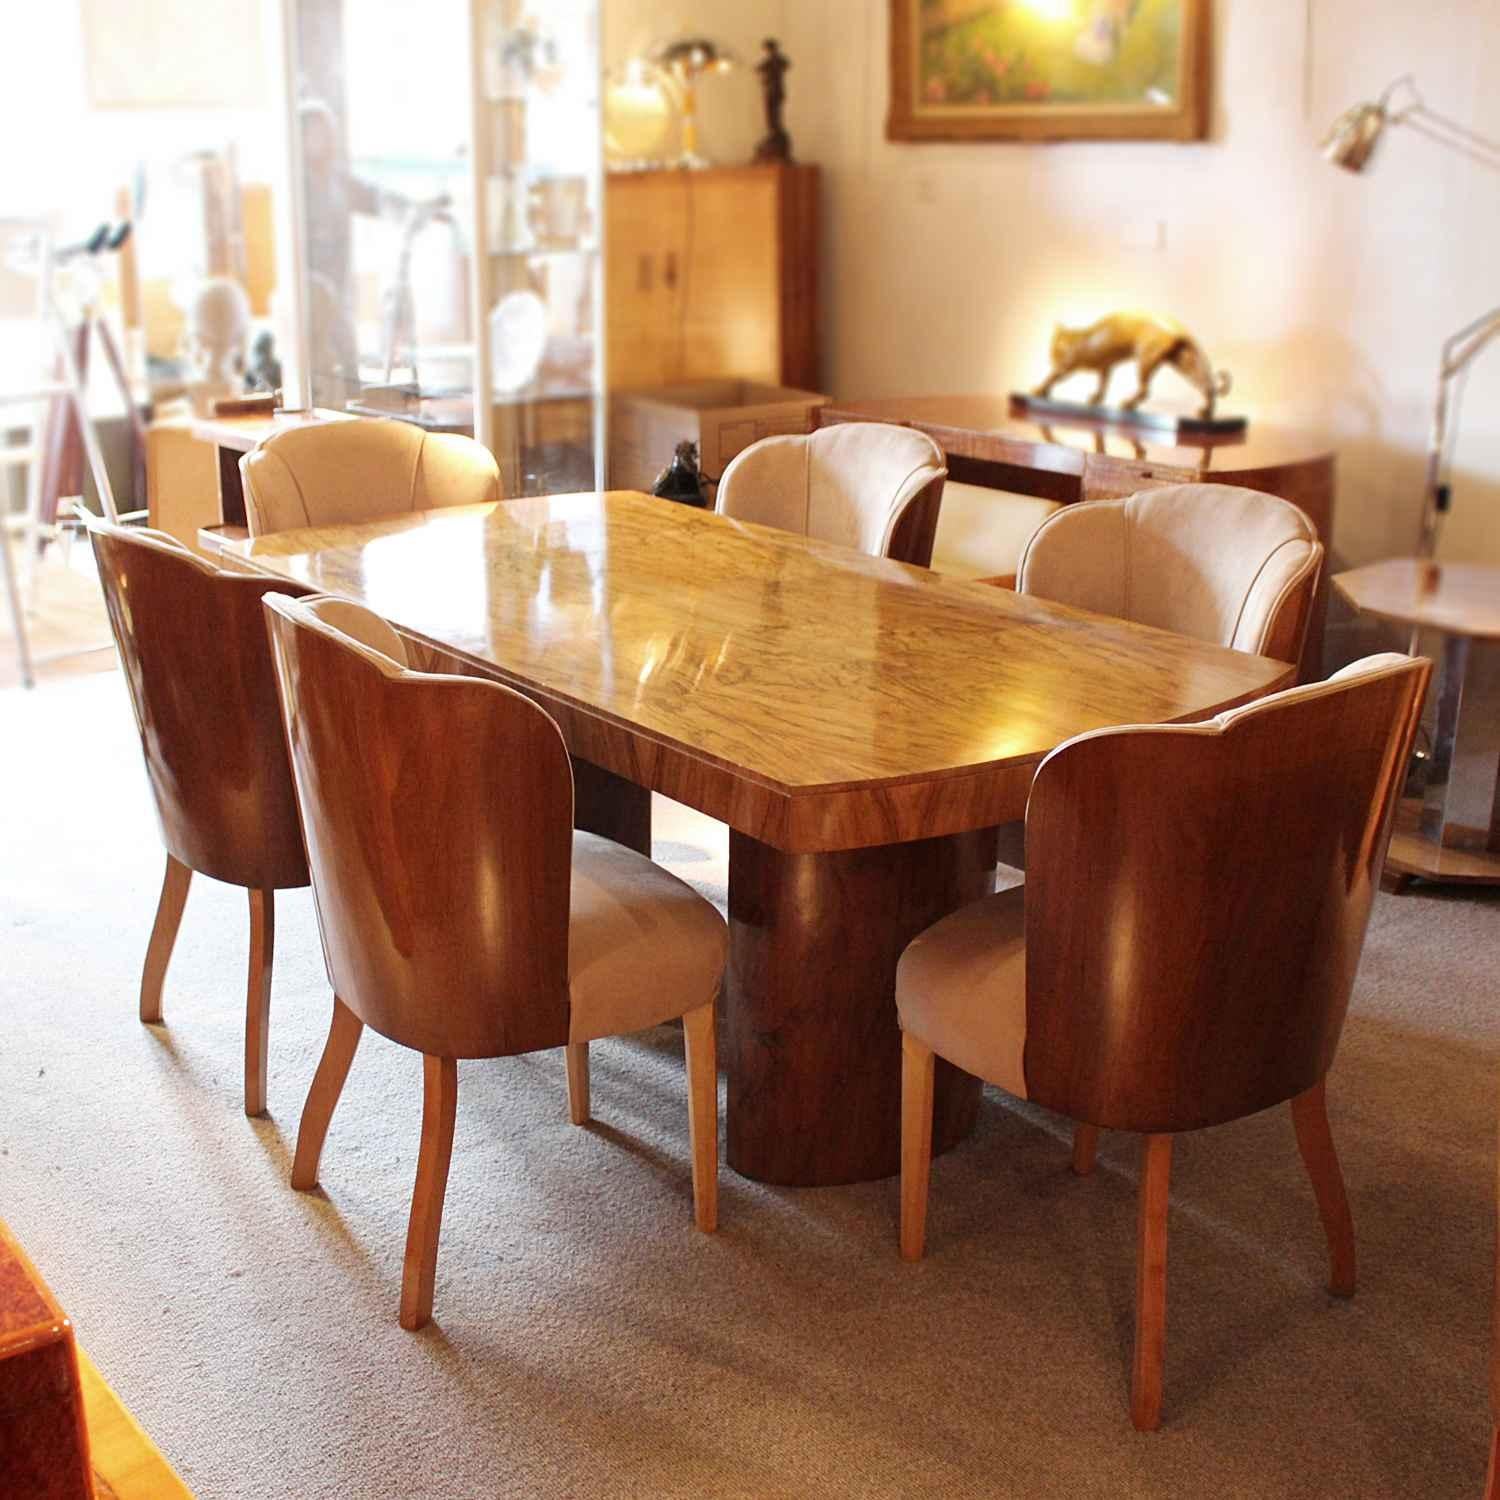 An Art Deco dining table with six chairs by Harry & Lou Epstein. Figured walnut table set over pedestal legs. Chairs wrapped in walnut and upholstered in oatmeal Alcantara suede fabric.

Dimensions:

Table: H 78 cm, W 91 cm, L 184 cm

Chairs: